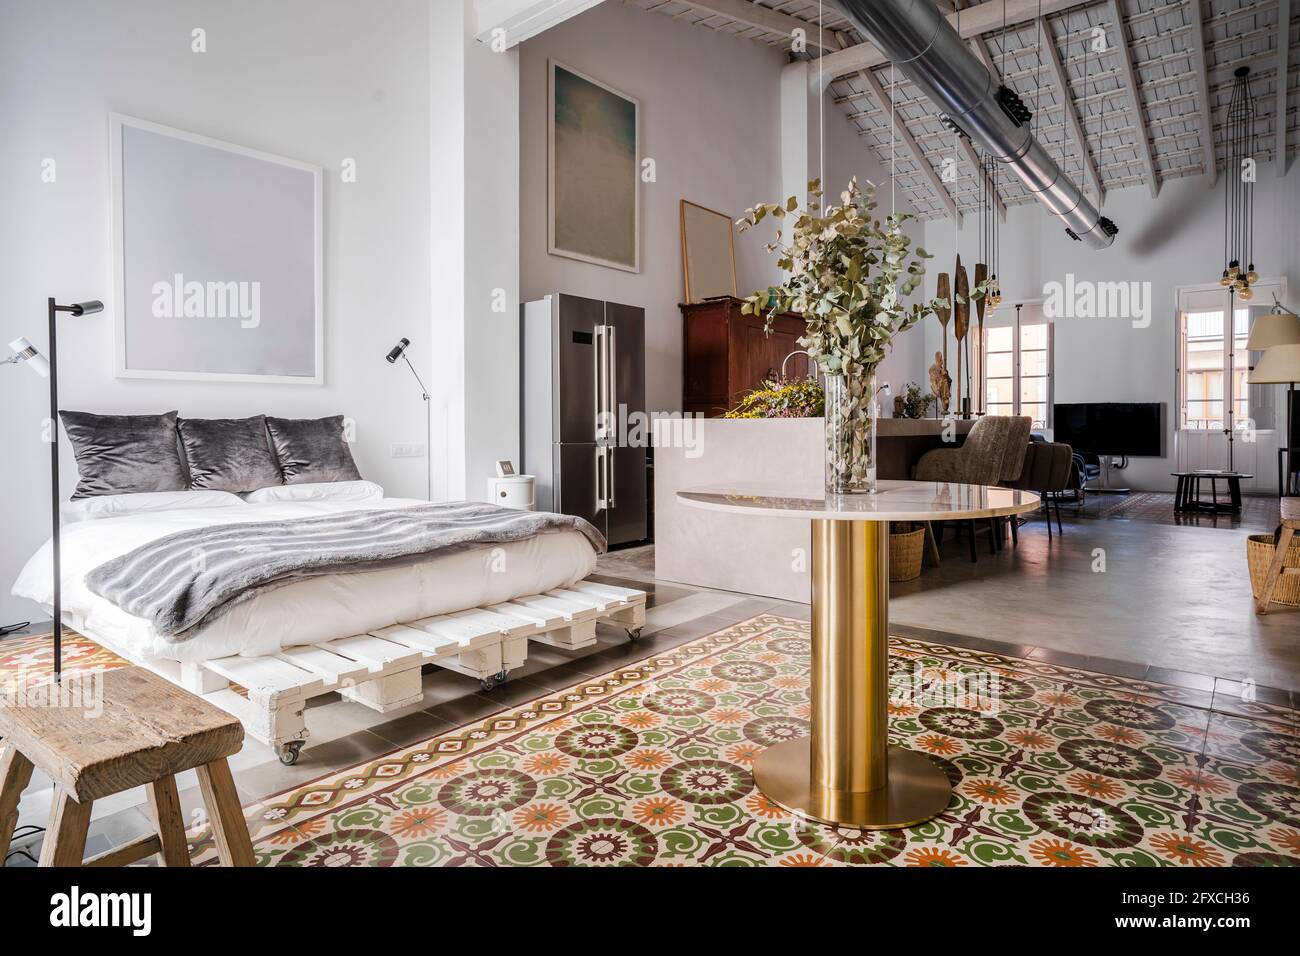 Interior of loft apartment with bed Stock Photo